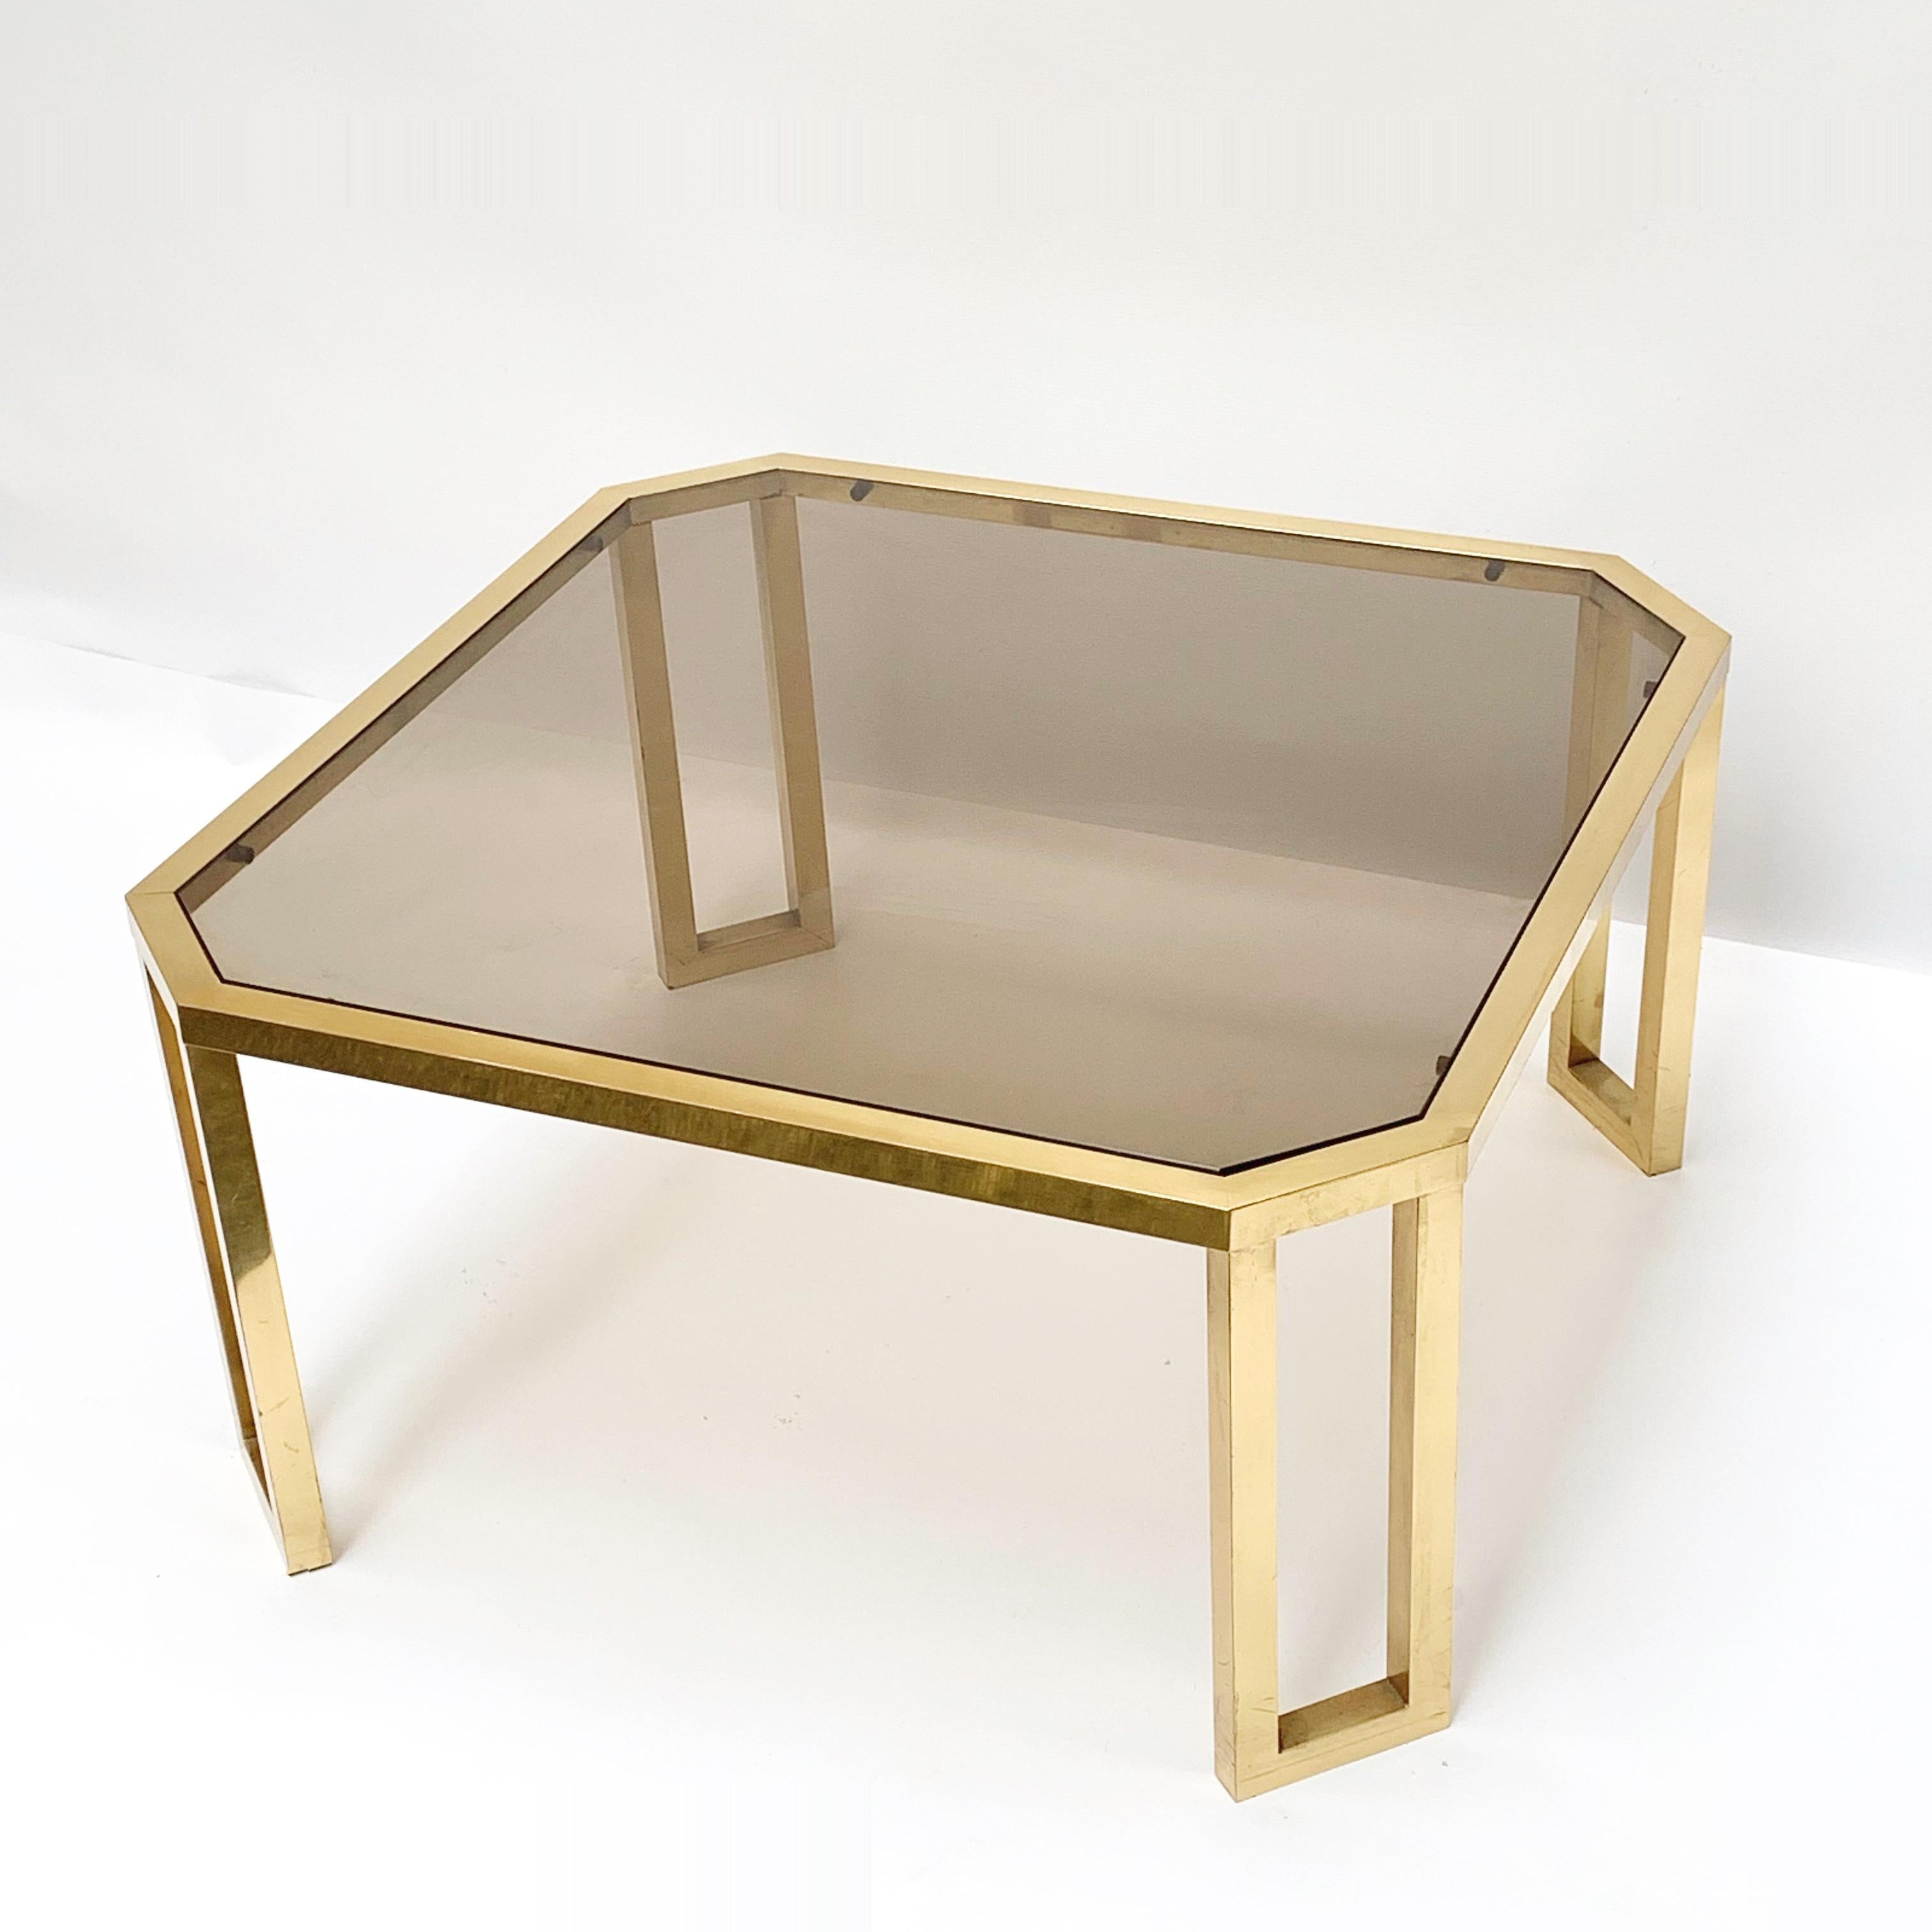 Mid-Century Modern Maison Jansen Octagonal Tables in Brass and Glass, France, 1970s Coffee Tables For Sale